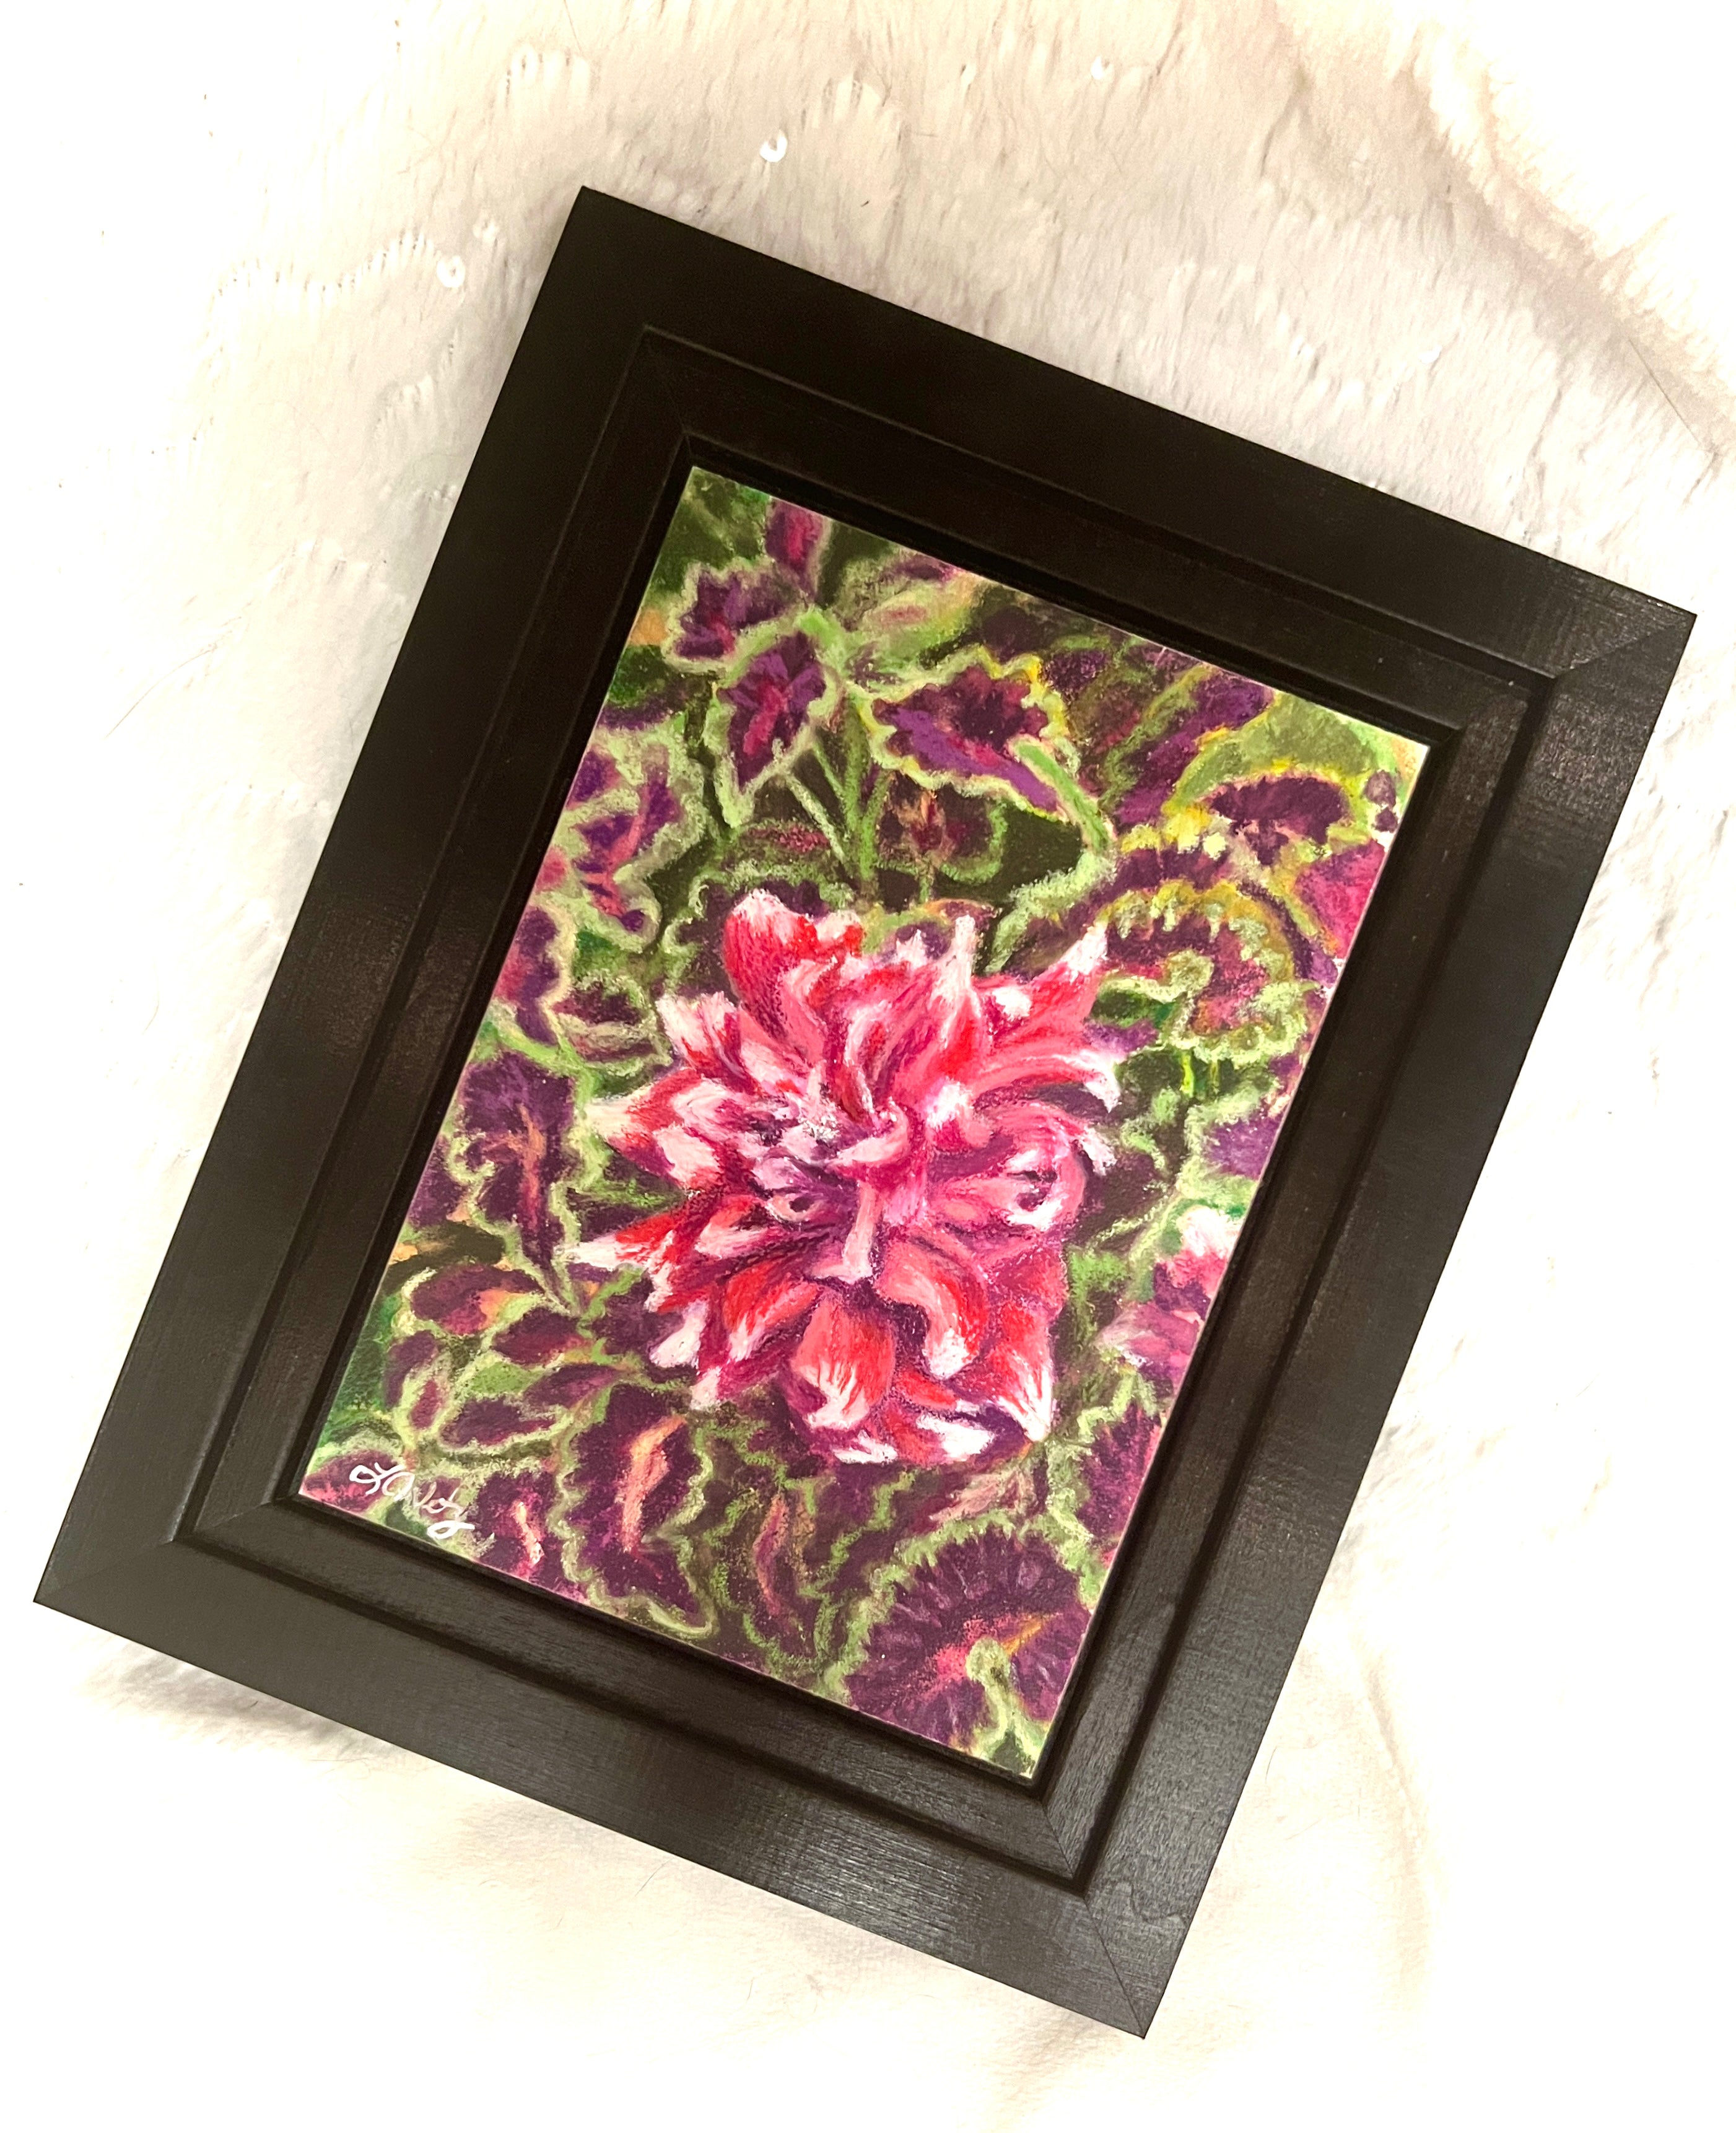 Red and White Dahlia wrapped in Coleus - Original Painting - Framed